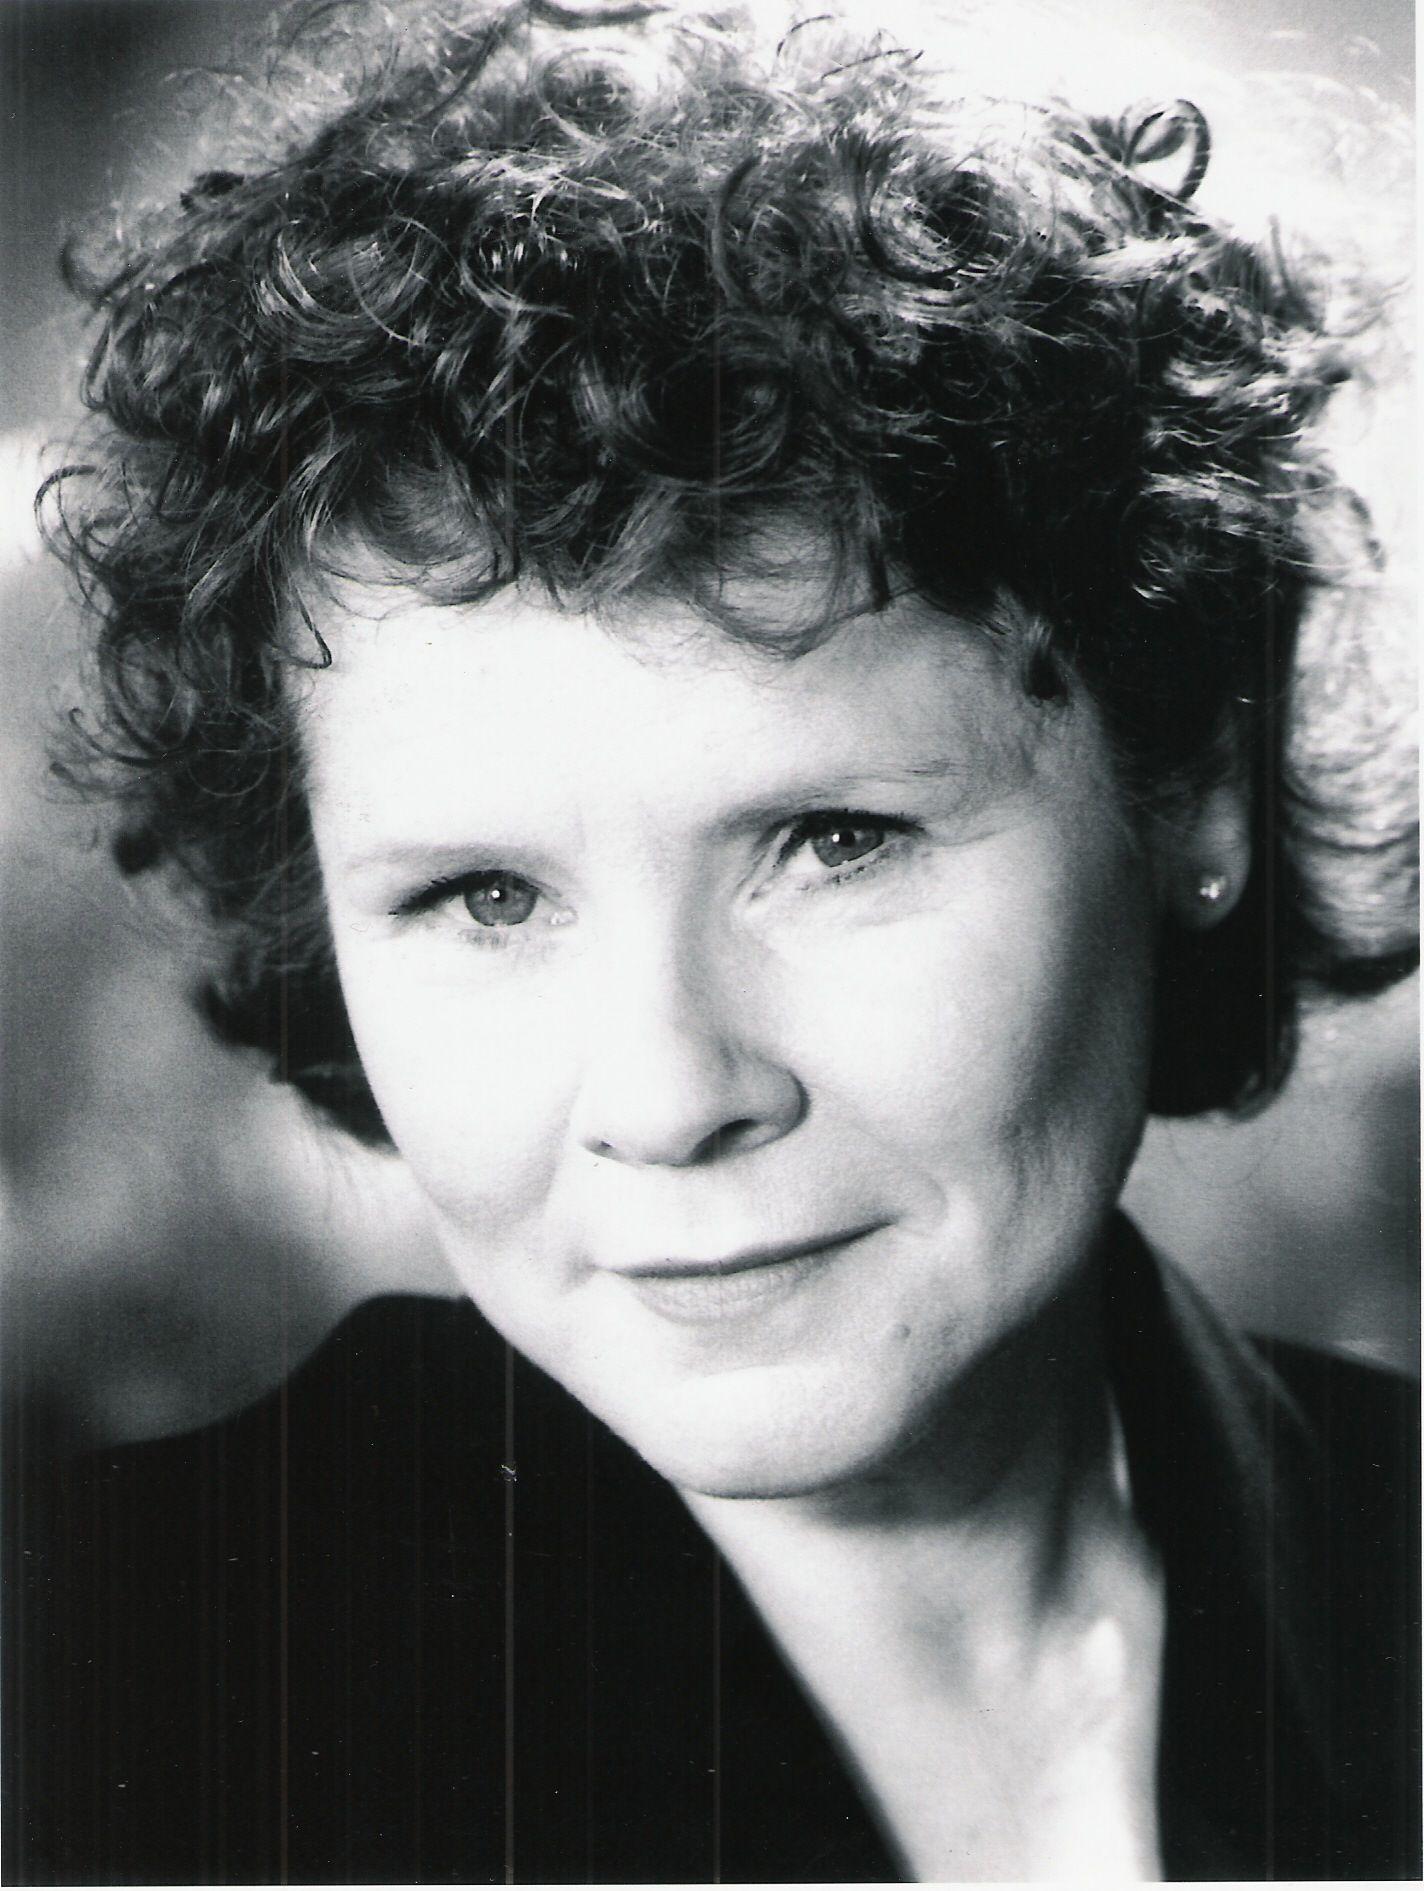 Imelda Staunton wins Best Performance by an Actress in a